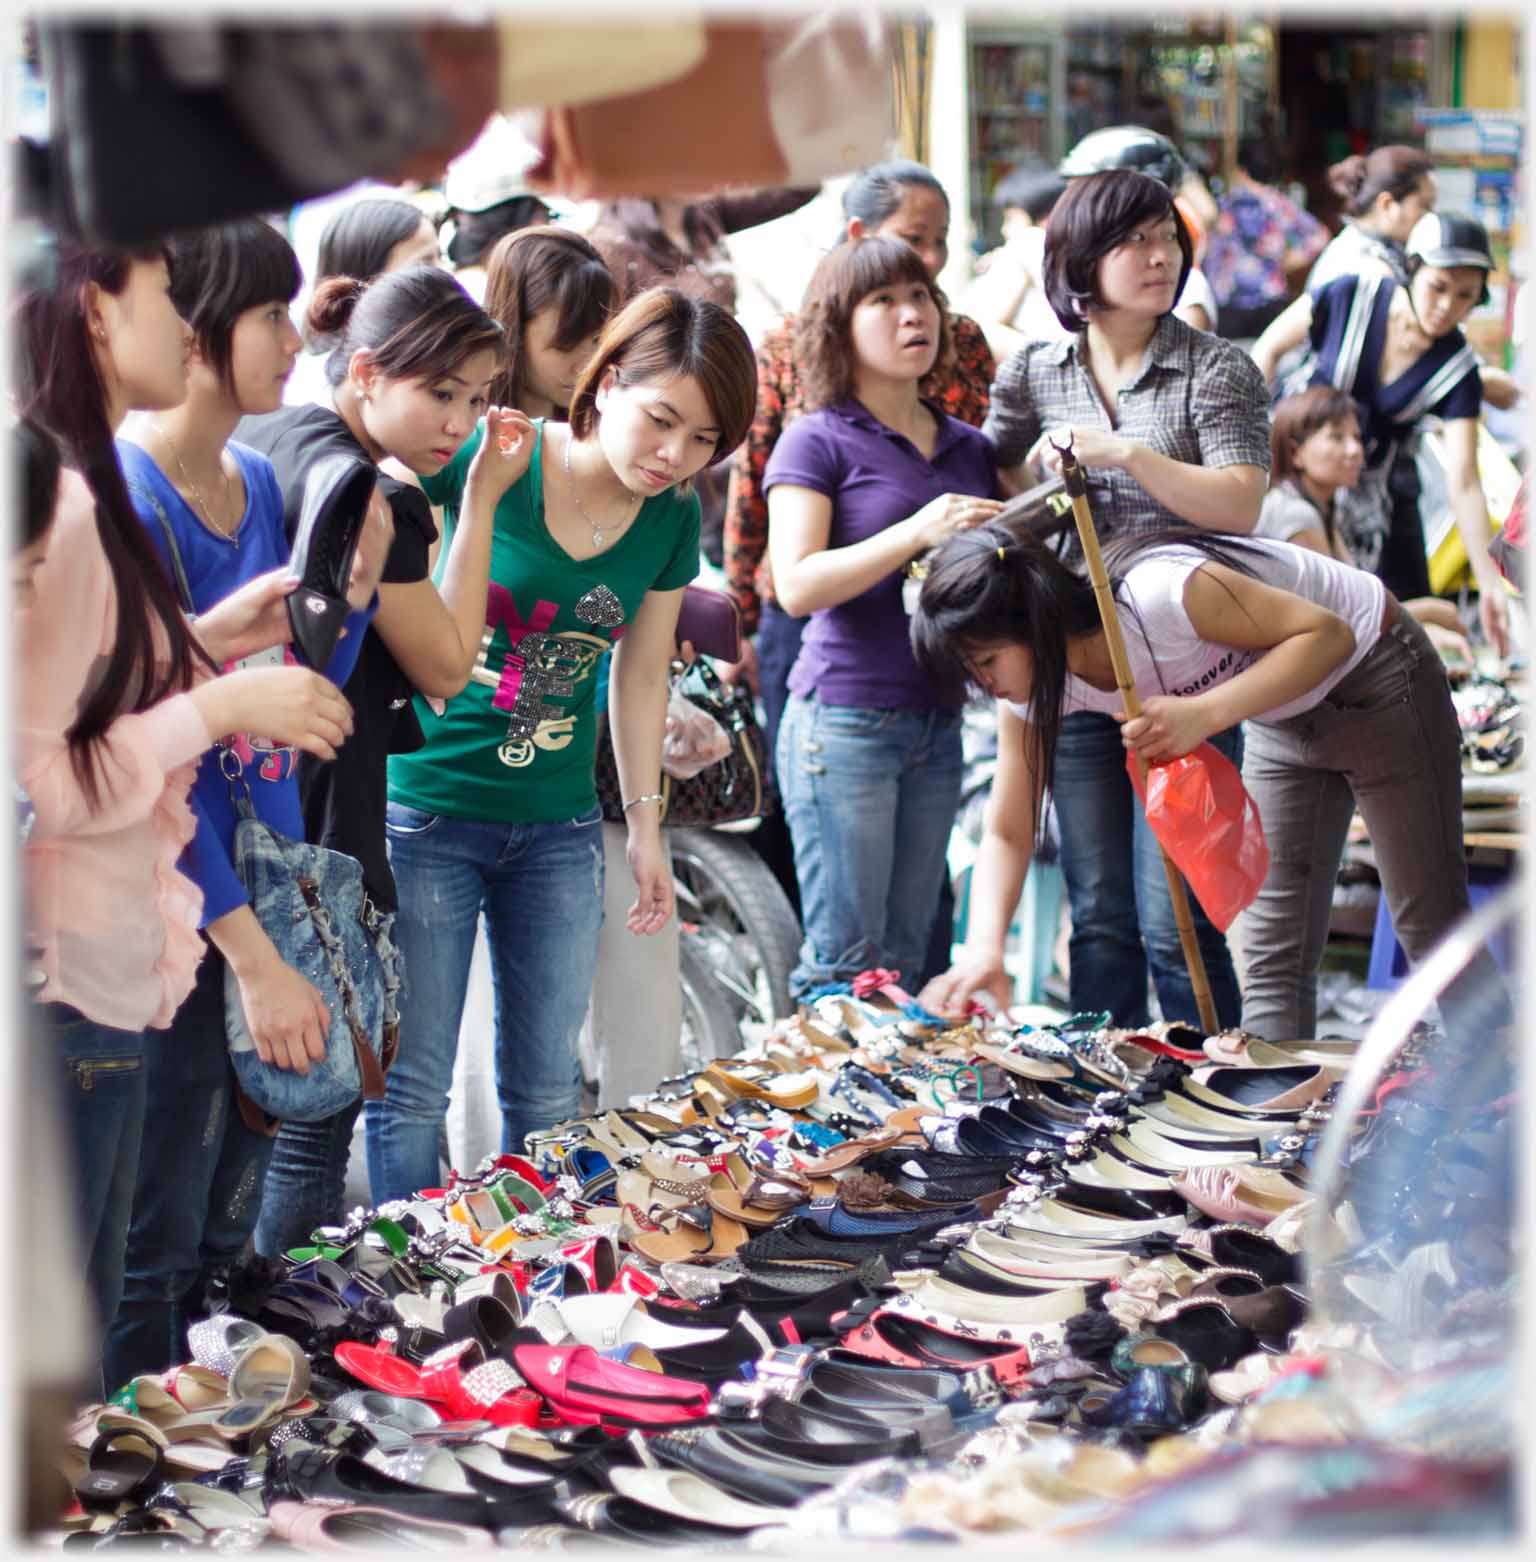 Women crowding to look at shoes laid out in front of a shop.